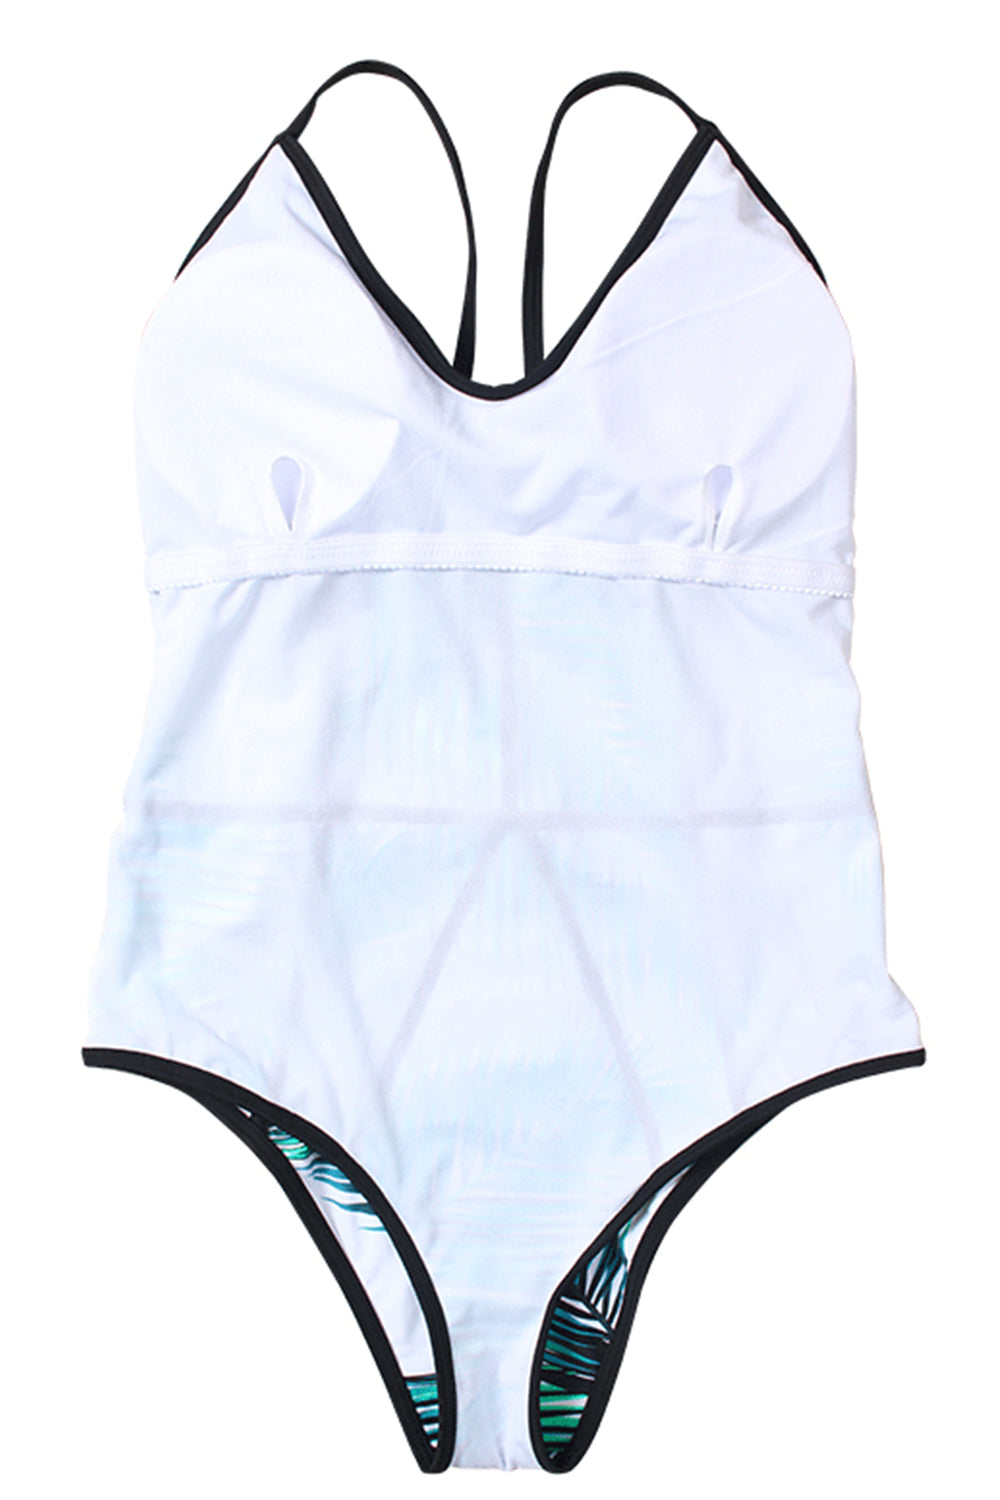 Iyasson Tropical Leaves Print One-piece Swimsuit